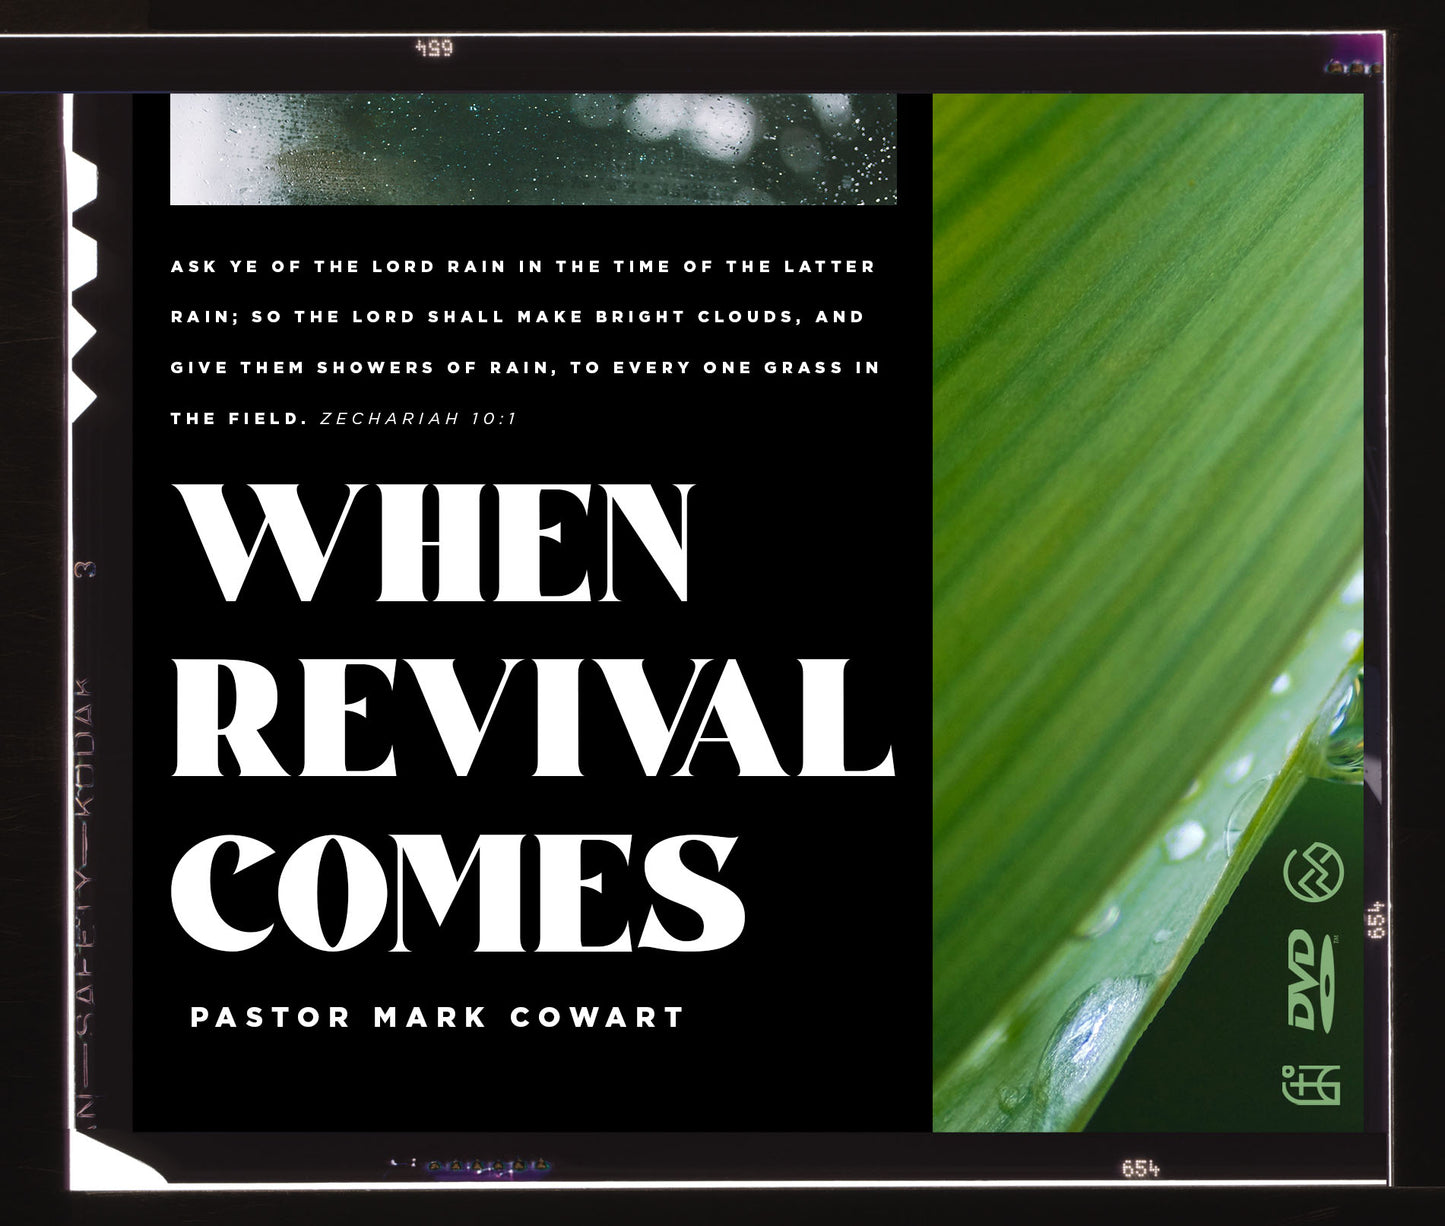 DVD cover - When Revival Comes by Pastor Mark Cowart - Ask ye of the Lord Rain in the time of the latter rain, so the Lord shall make bright clouds, and give the showers of rain, to every one grass in the field. Zechariah 10:1